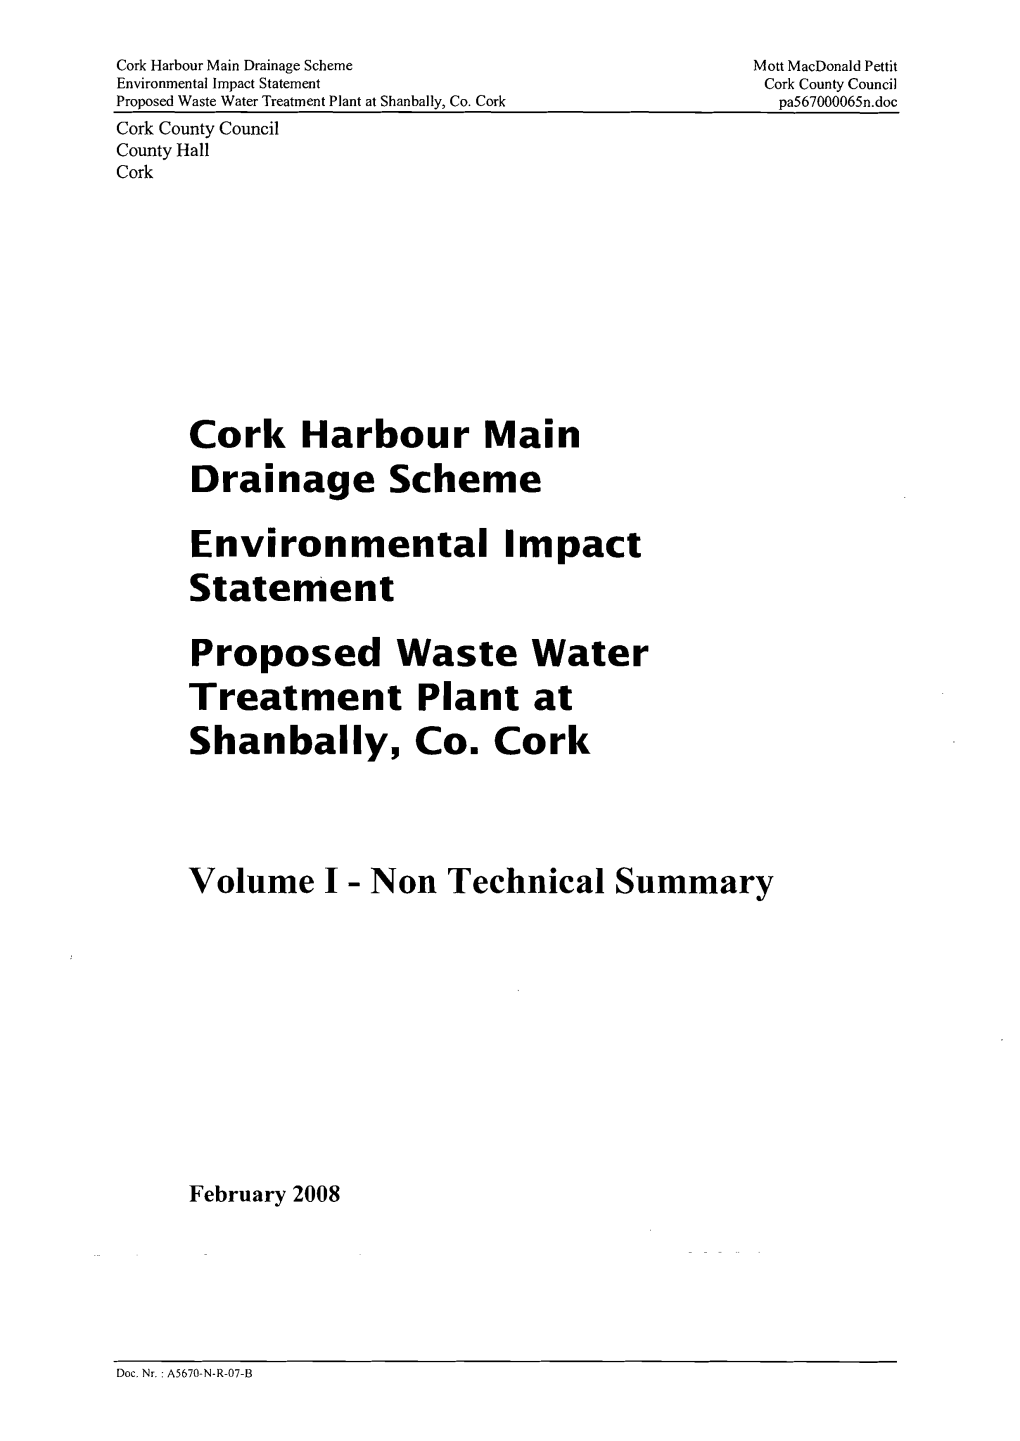 Cork Harbour Main Drainage Scheme Environmental Impact Statement Proposed Waste Water Treatment Plant at Shanbally, Co